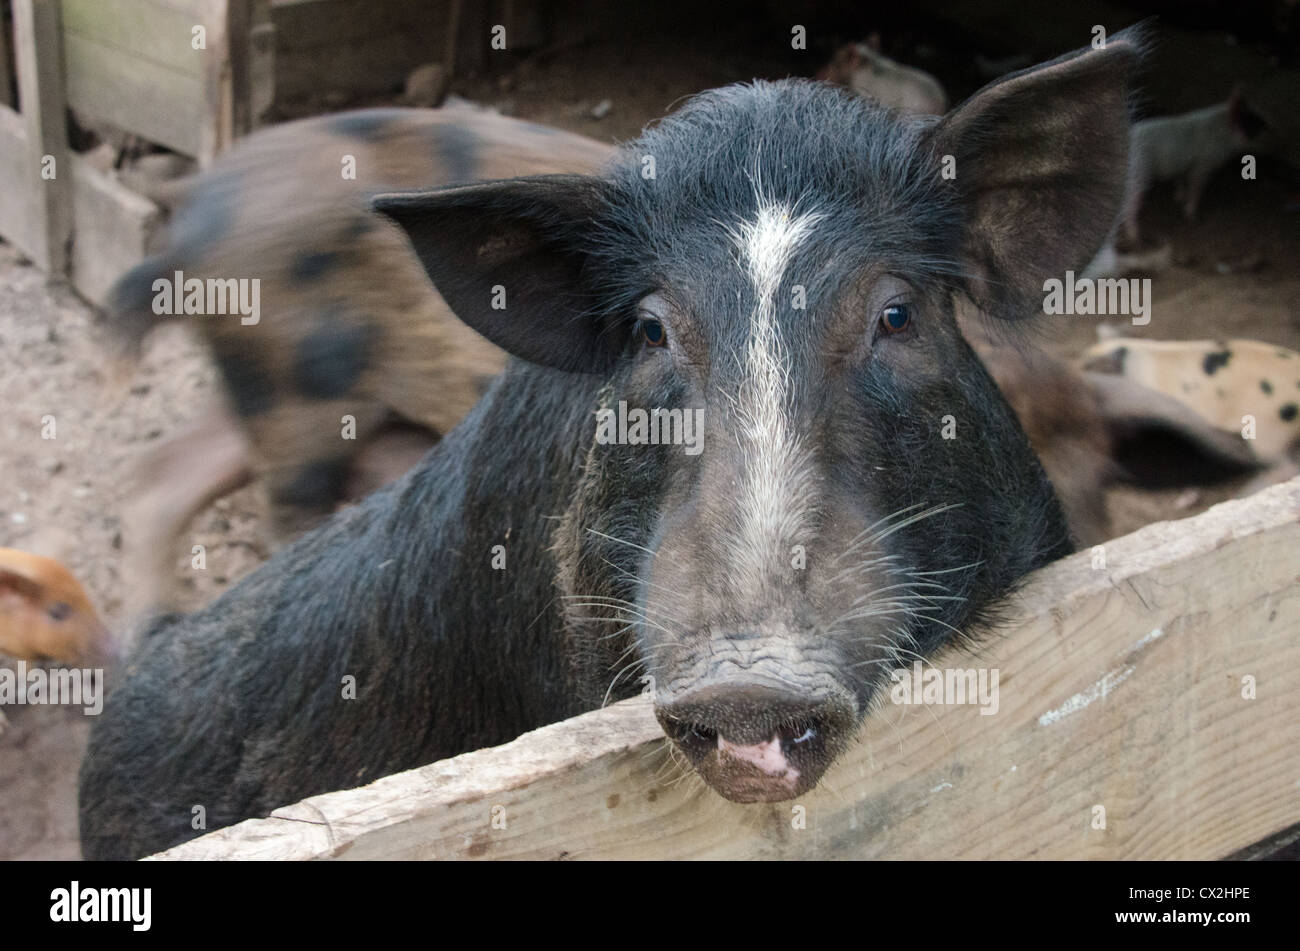 A Pig in a pen in the Islands of the Marquesas, French Polynesia Stock Photo